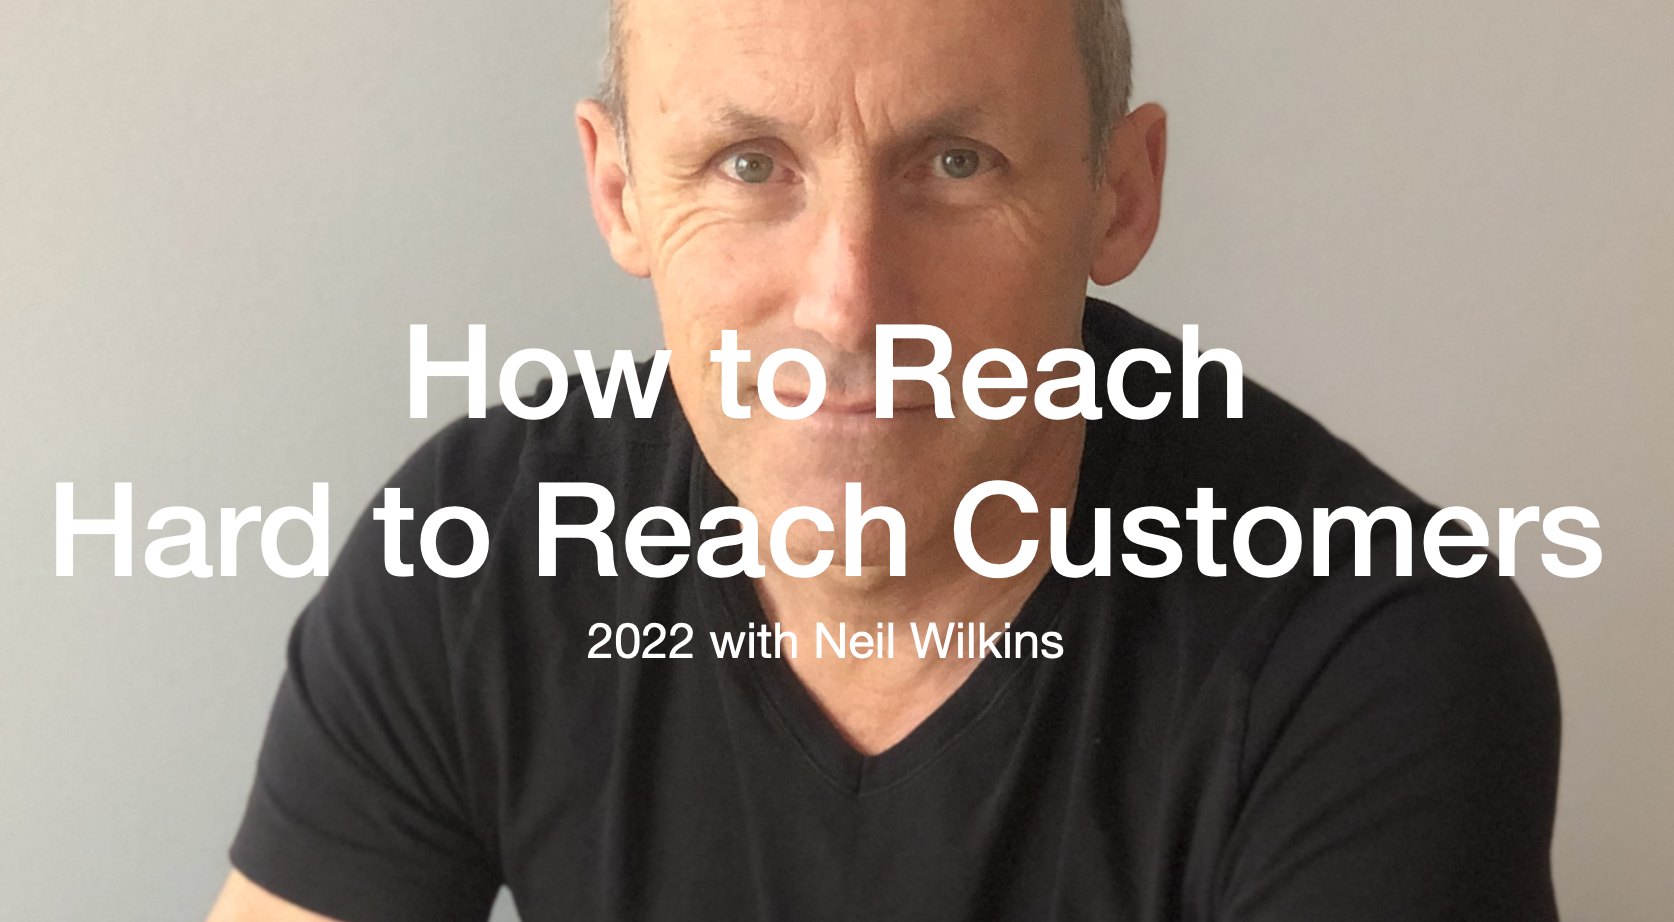 How to Reach Hard to Reach Customers